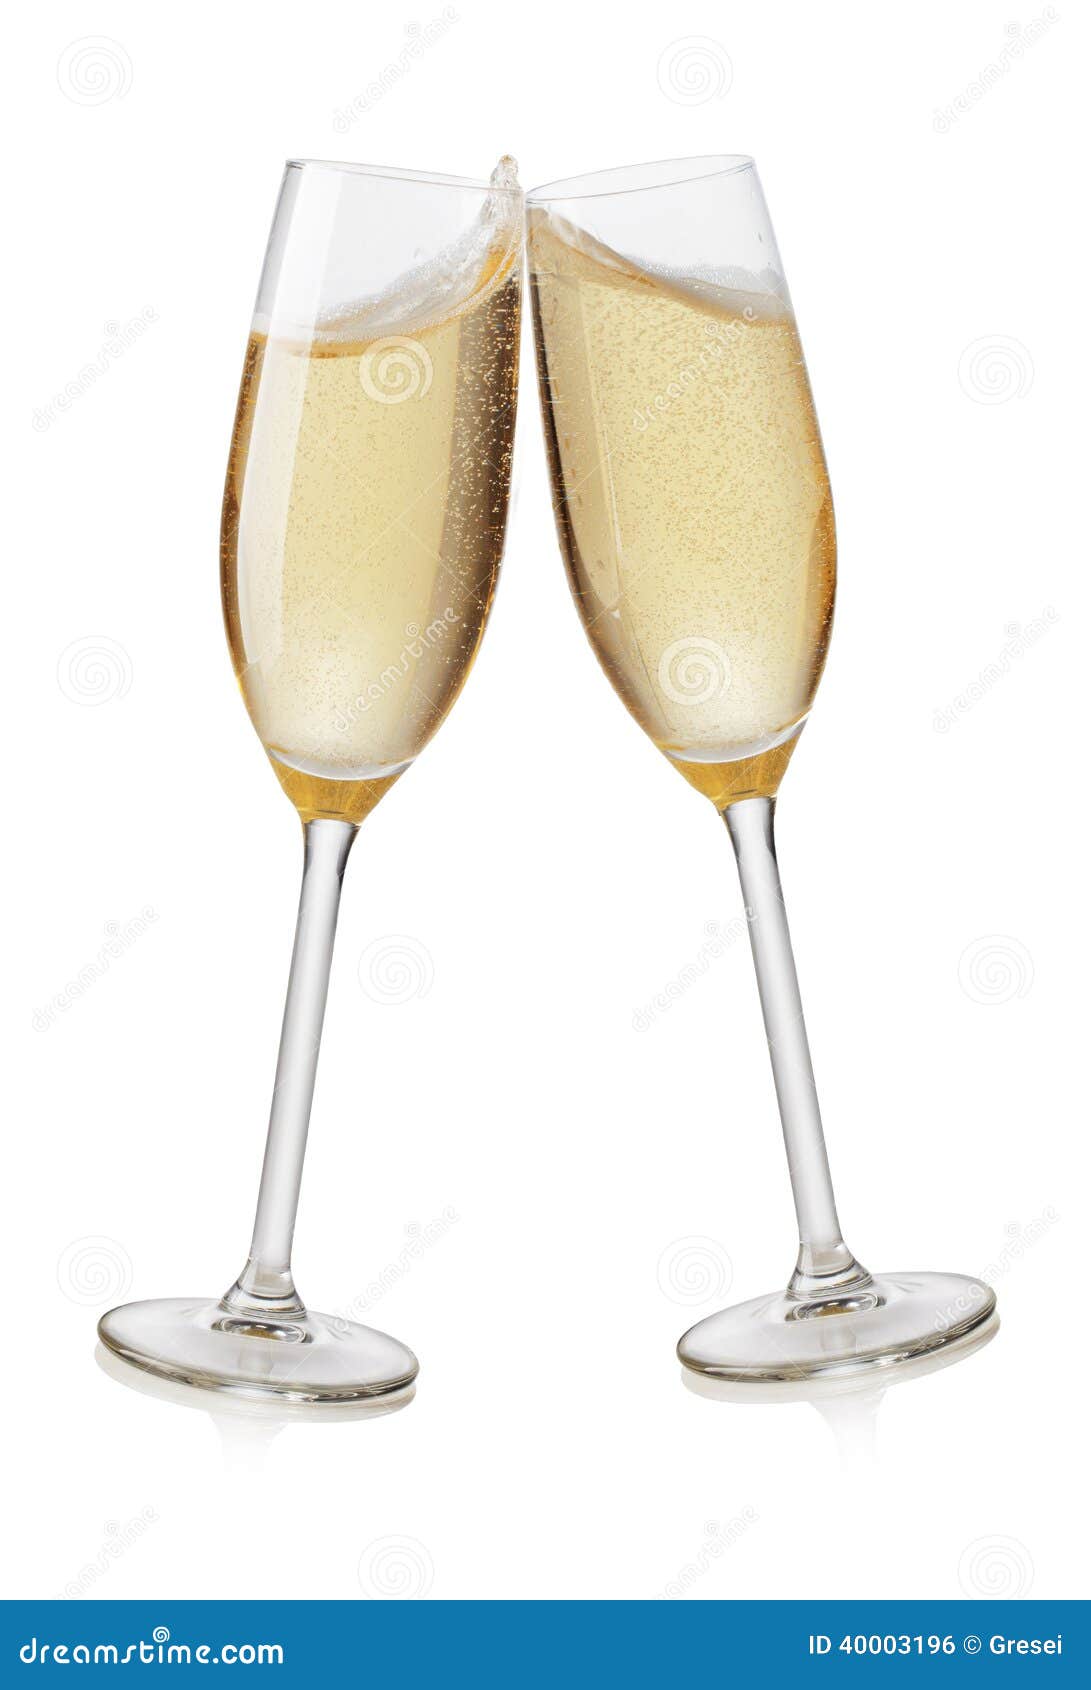 https://thumbs.dreamstime.com/z/champagne-flutes-toasting-isolated-white-background-40003196.jpg